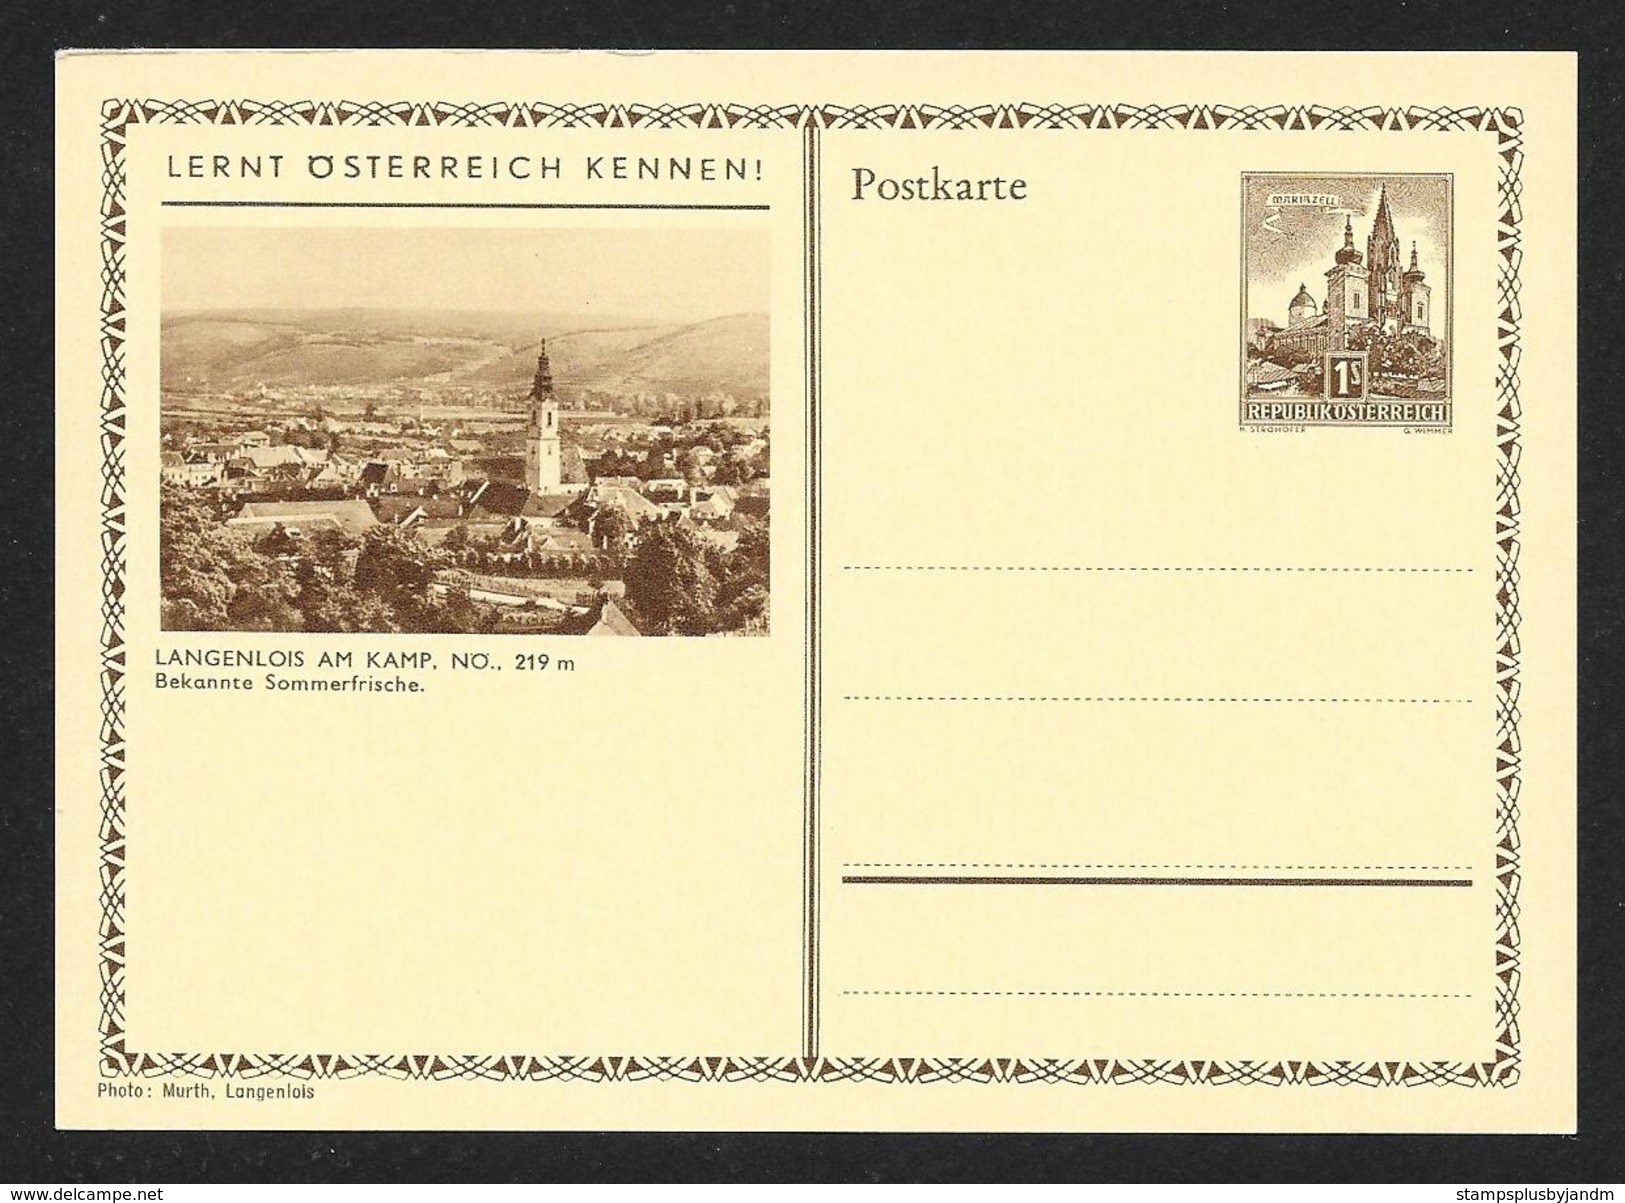 AUSTRIA (105) View Postal Cards Almost All Different Scenes Unused c1950s STK#A10001//A10110